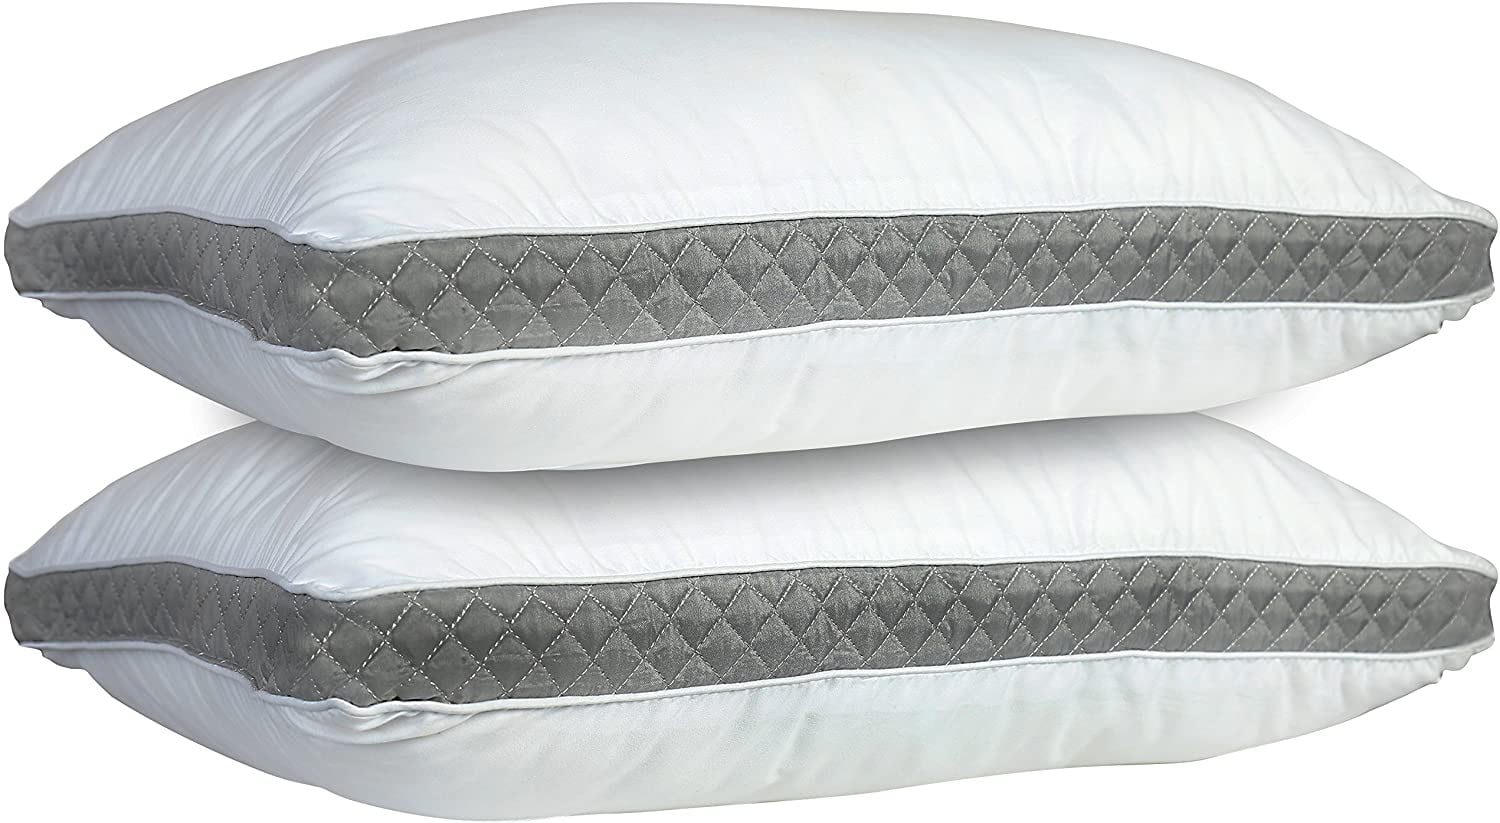 Classic Pillows Pack of 2 Gusseted Bed Sleeping Down Alternative Quilted Pillow 